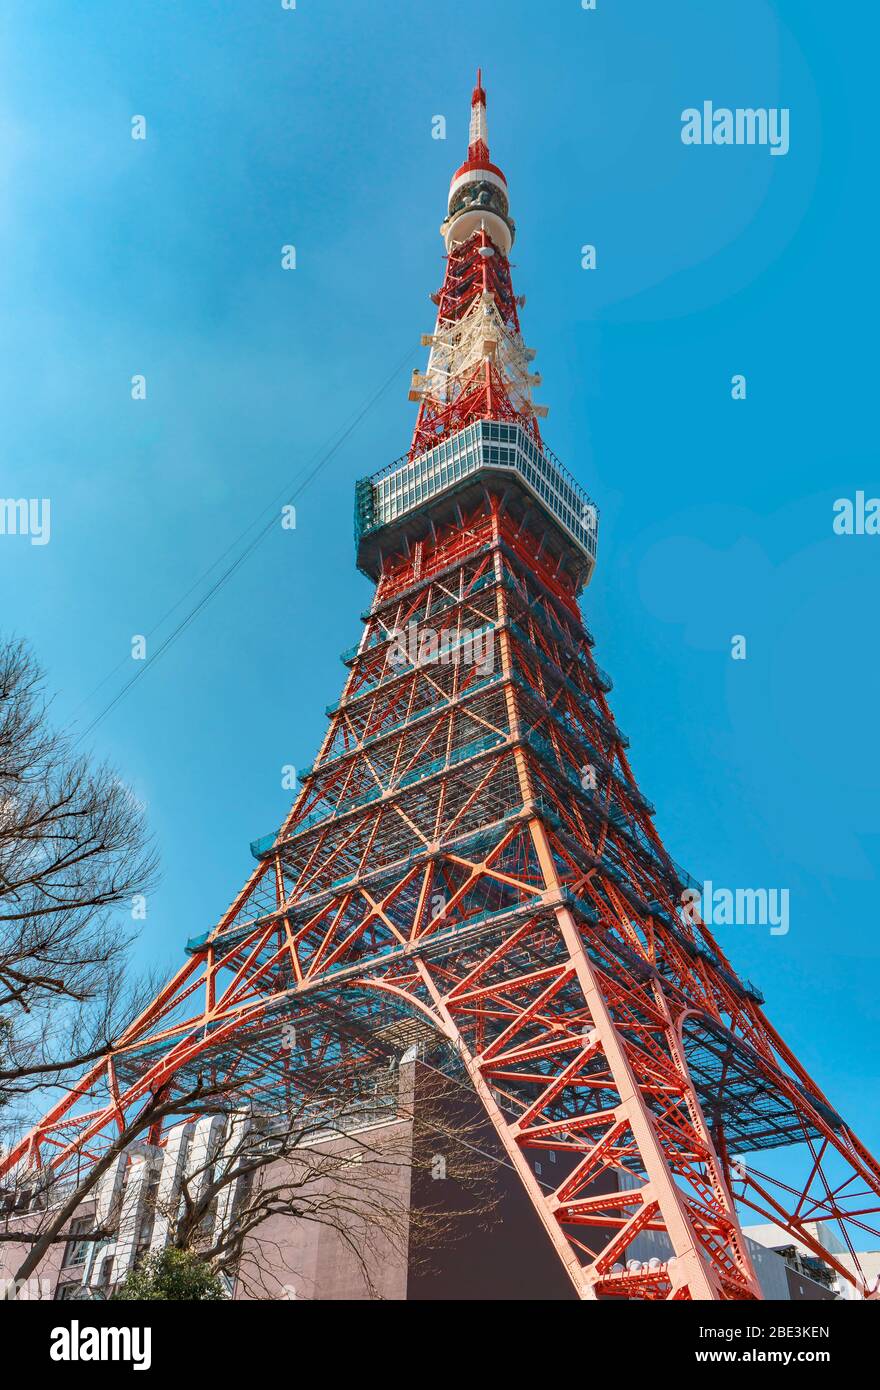 Tokyo Tower is the tallest lattice tower in Japan inspired by the Eiffel Tower. Stock Photo